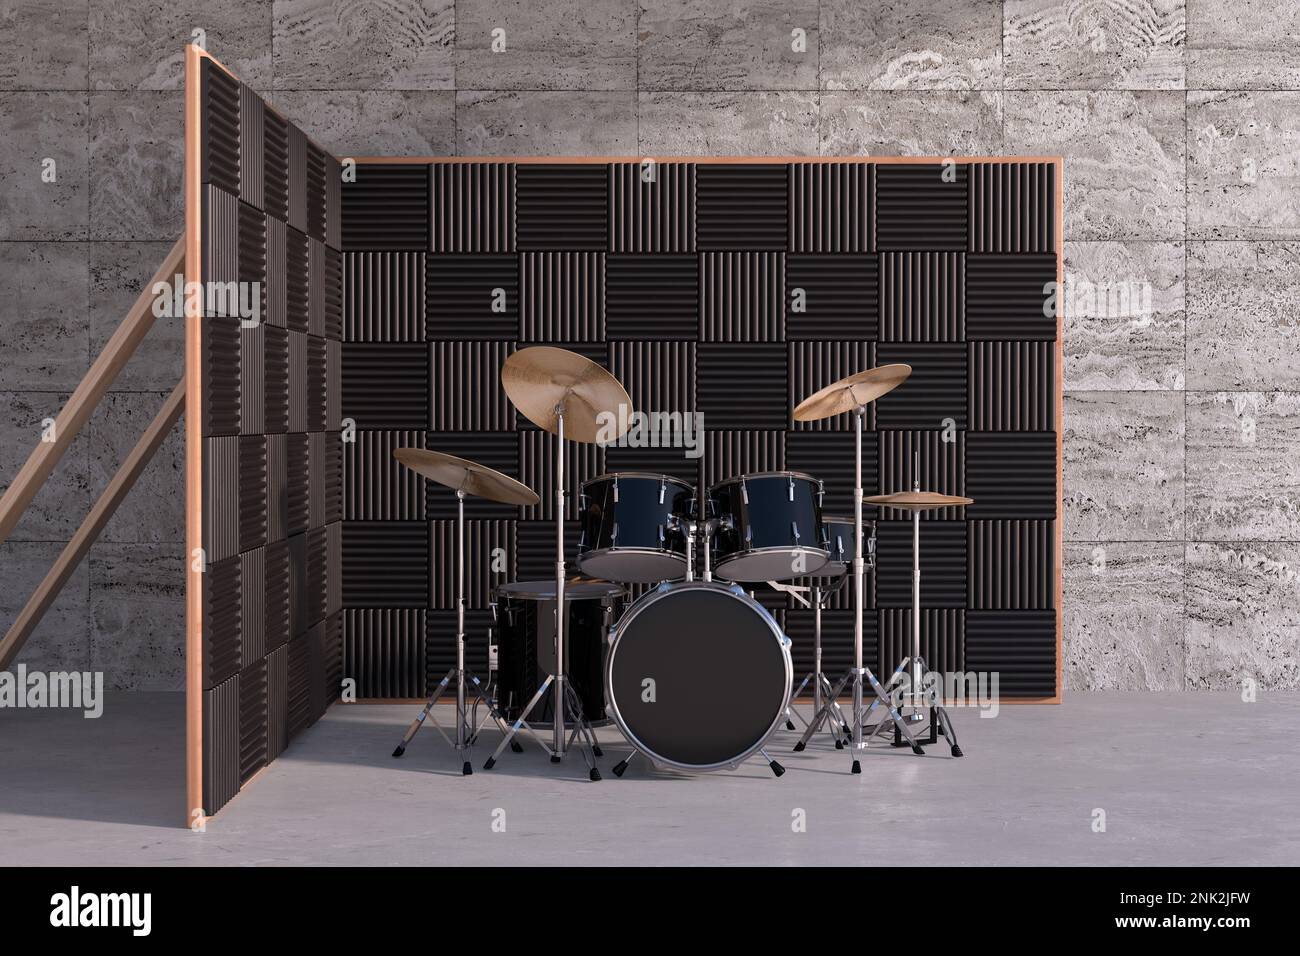 Black Professional Rock Black Drum Kit in Studio Music Recording Room with Dampening Acoustic Foam Panel Walls extreme closeup. 3d Rendering Stock Photo